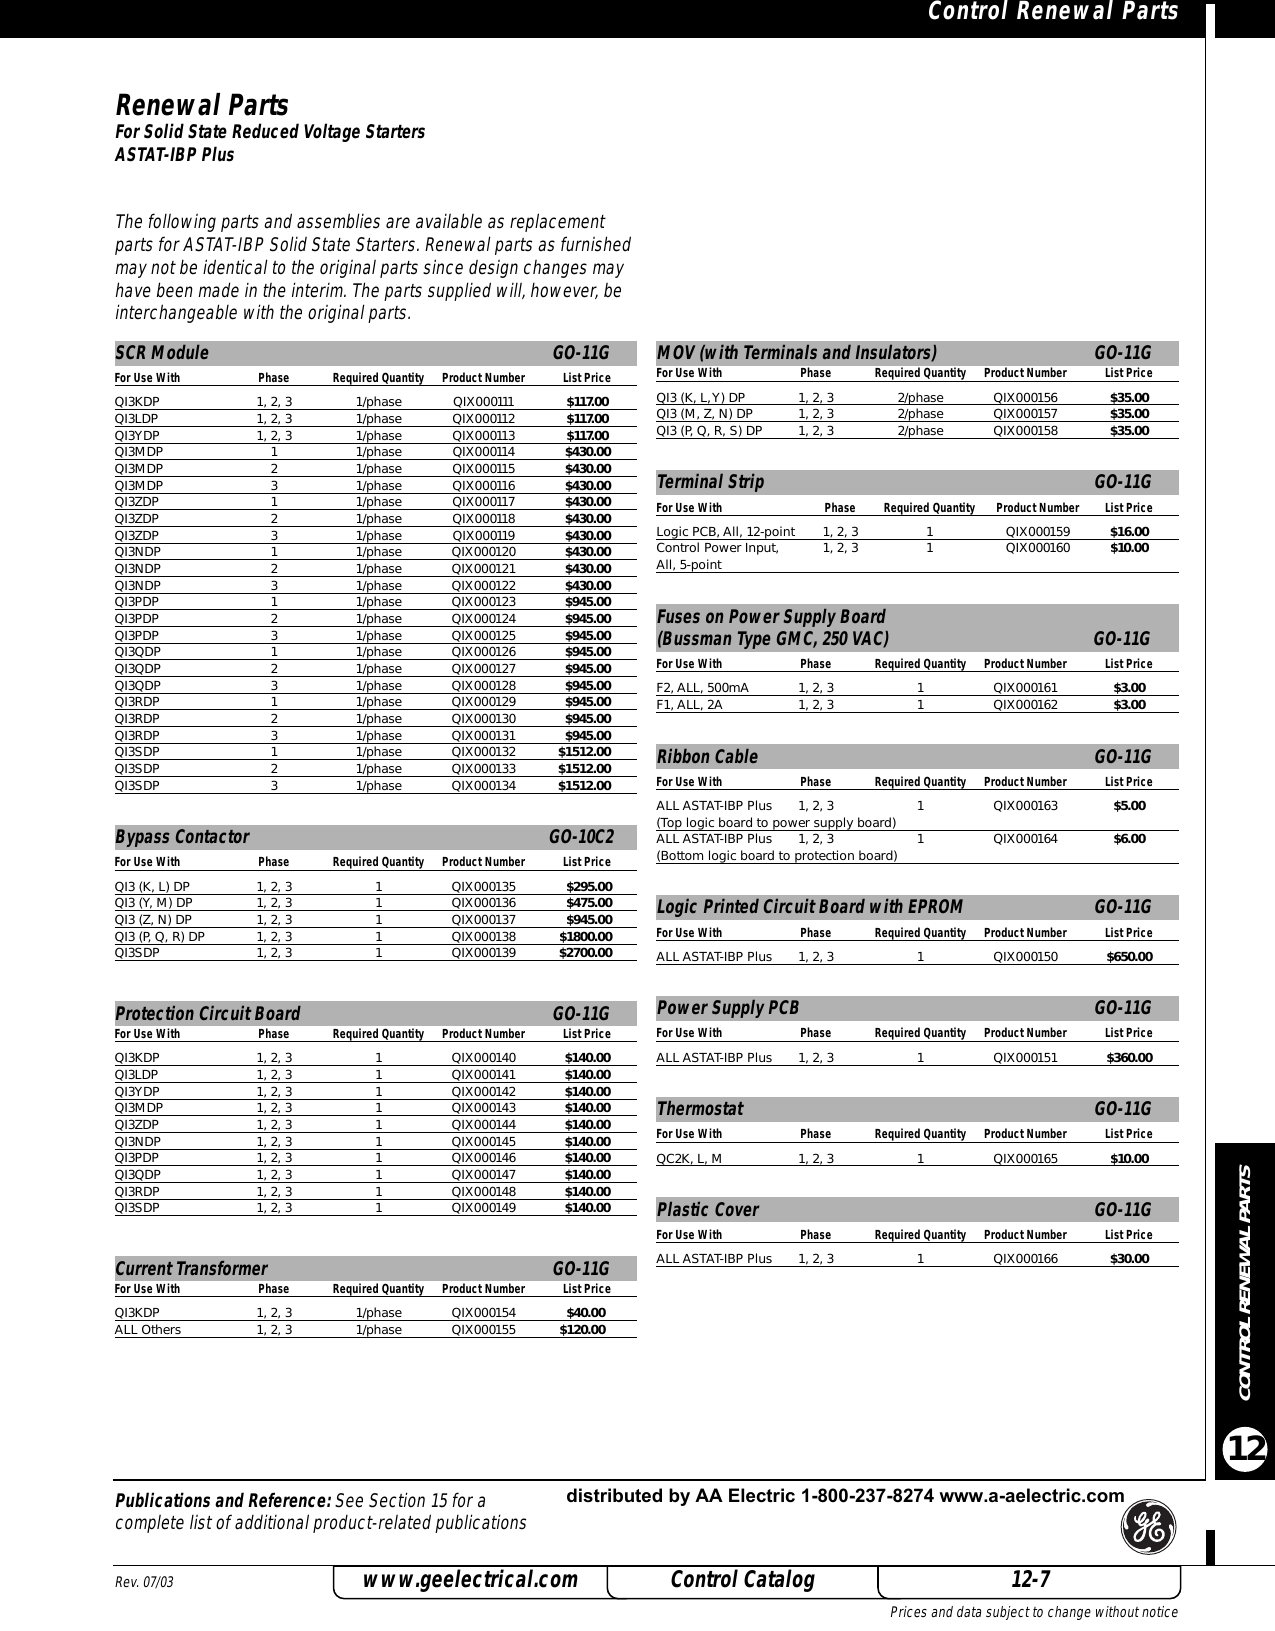 Page 7 of 8 - GE 2005 Control Catalog - Section 12  522426-Catalog